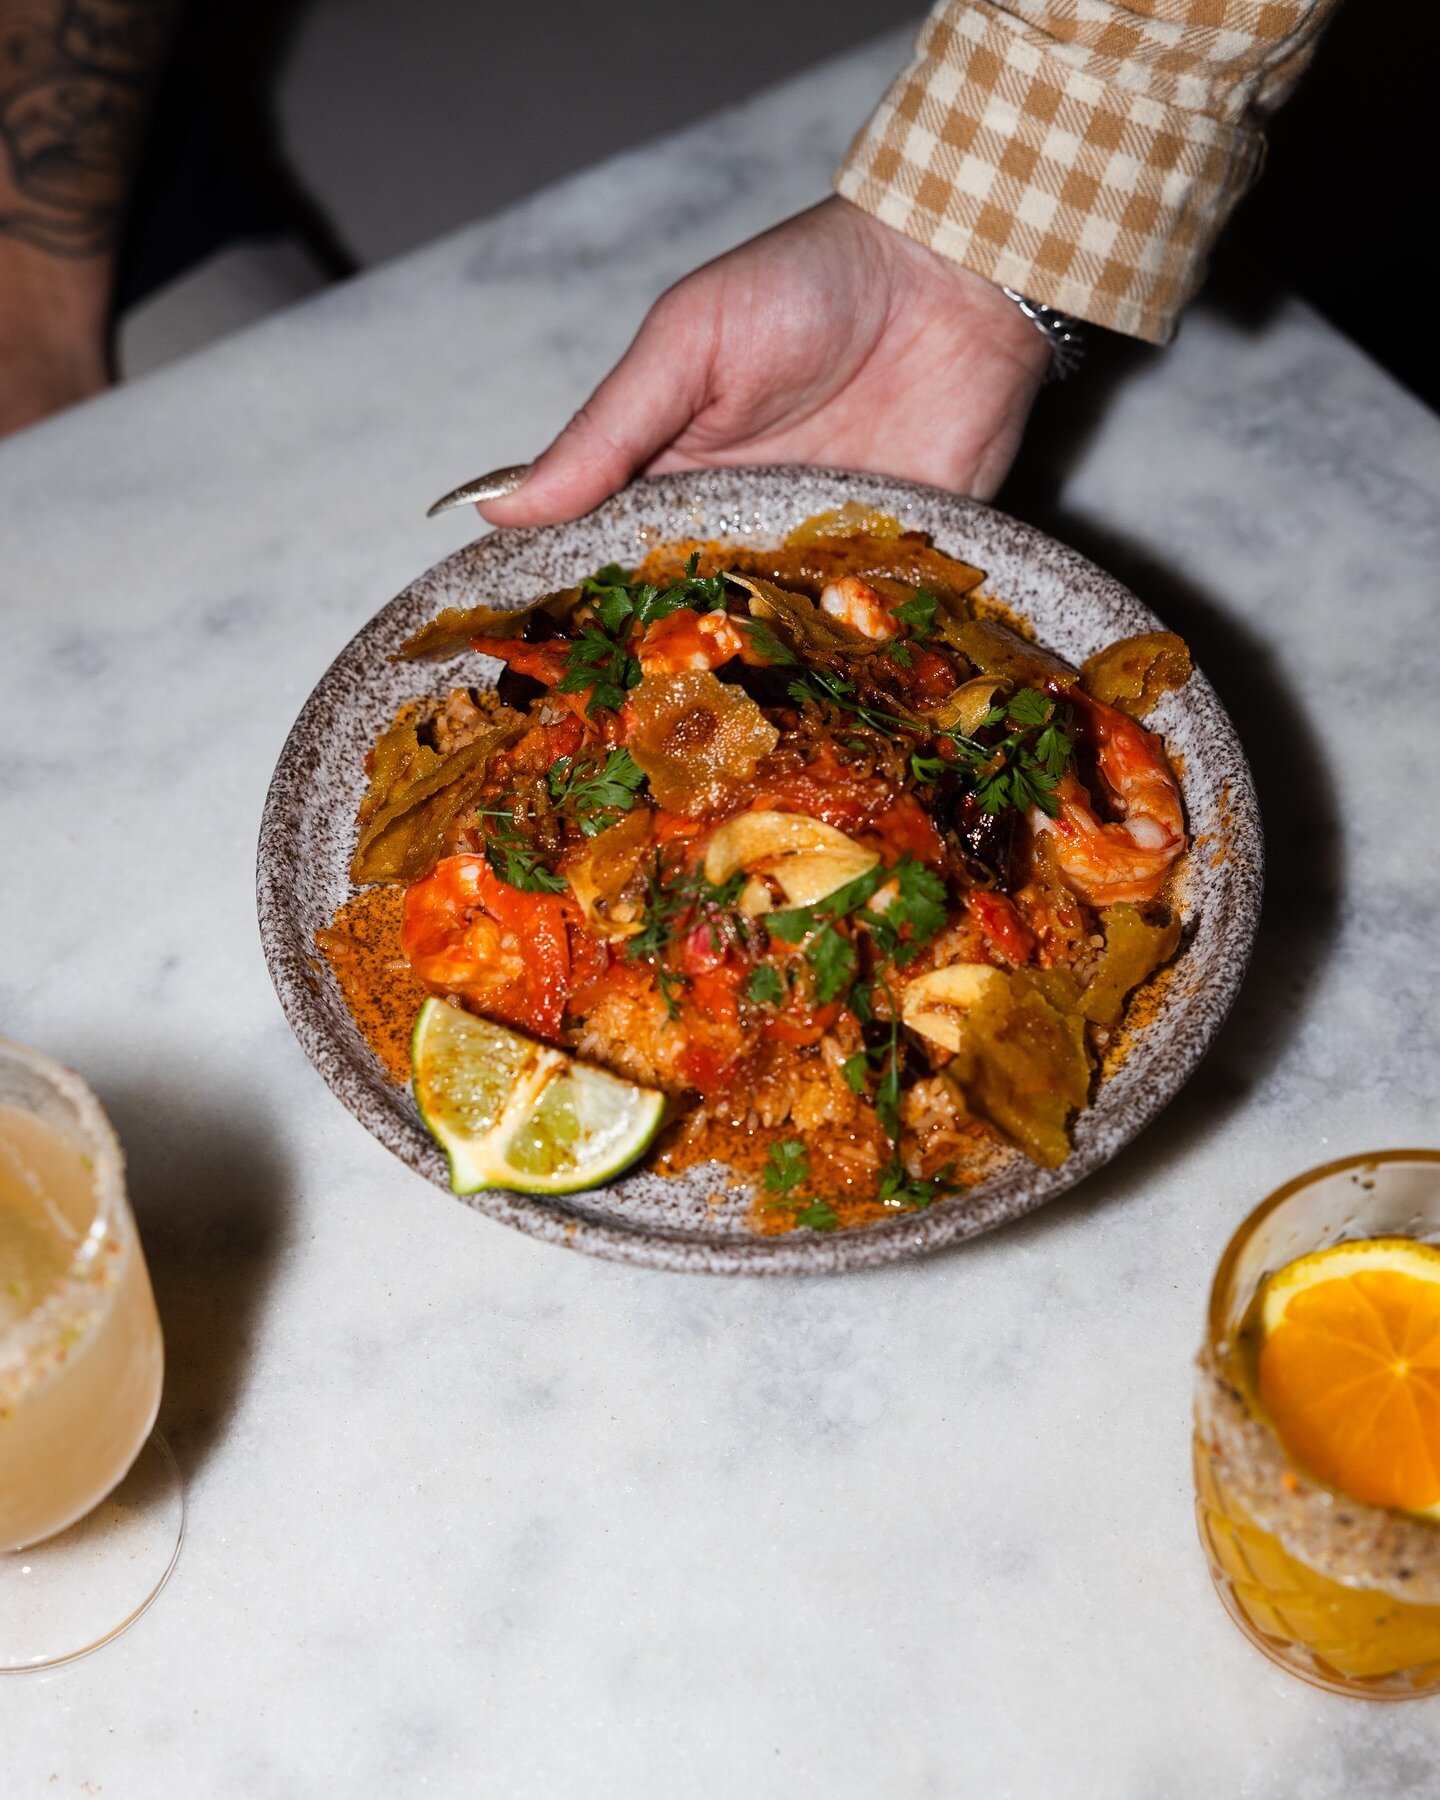 🦐 MEXICO MONDAY 🦐 one of our favorite days of the week&hellip; 

Stop in TONIGHT to see what the menu has goin&rsquo; on &mdash; this dish is from one of our past Mexico Monday menus: Guajillo  Stonington Red Shrimp with fried onion, chilis, jasmin